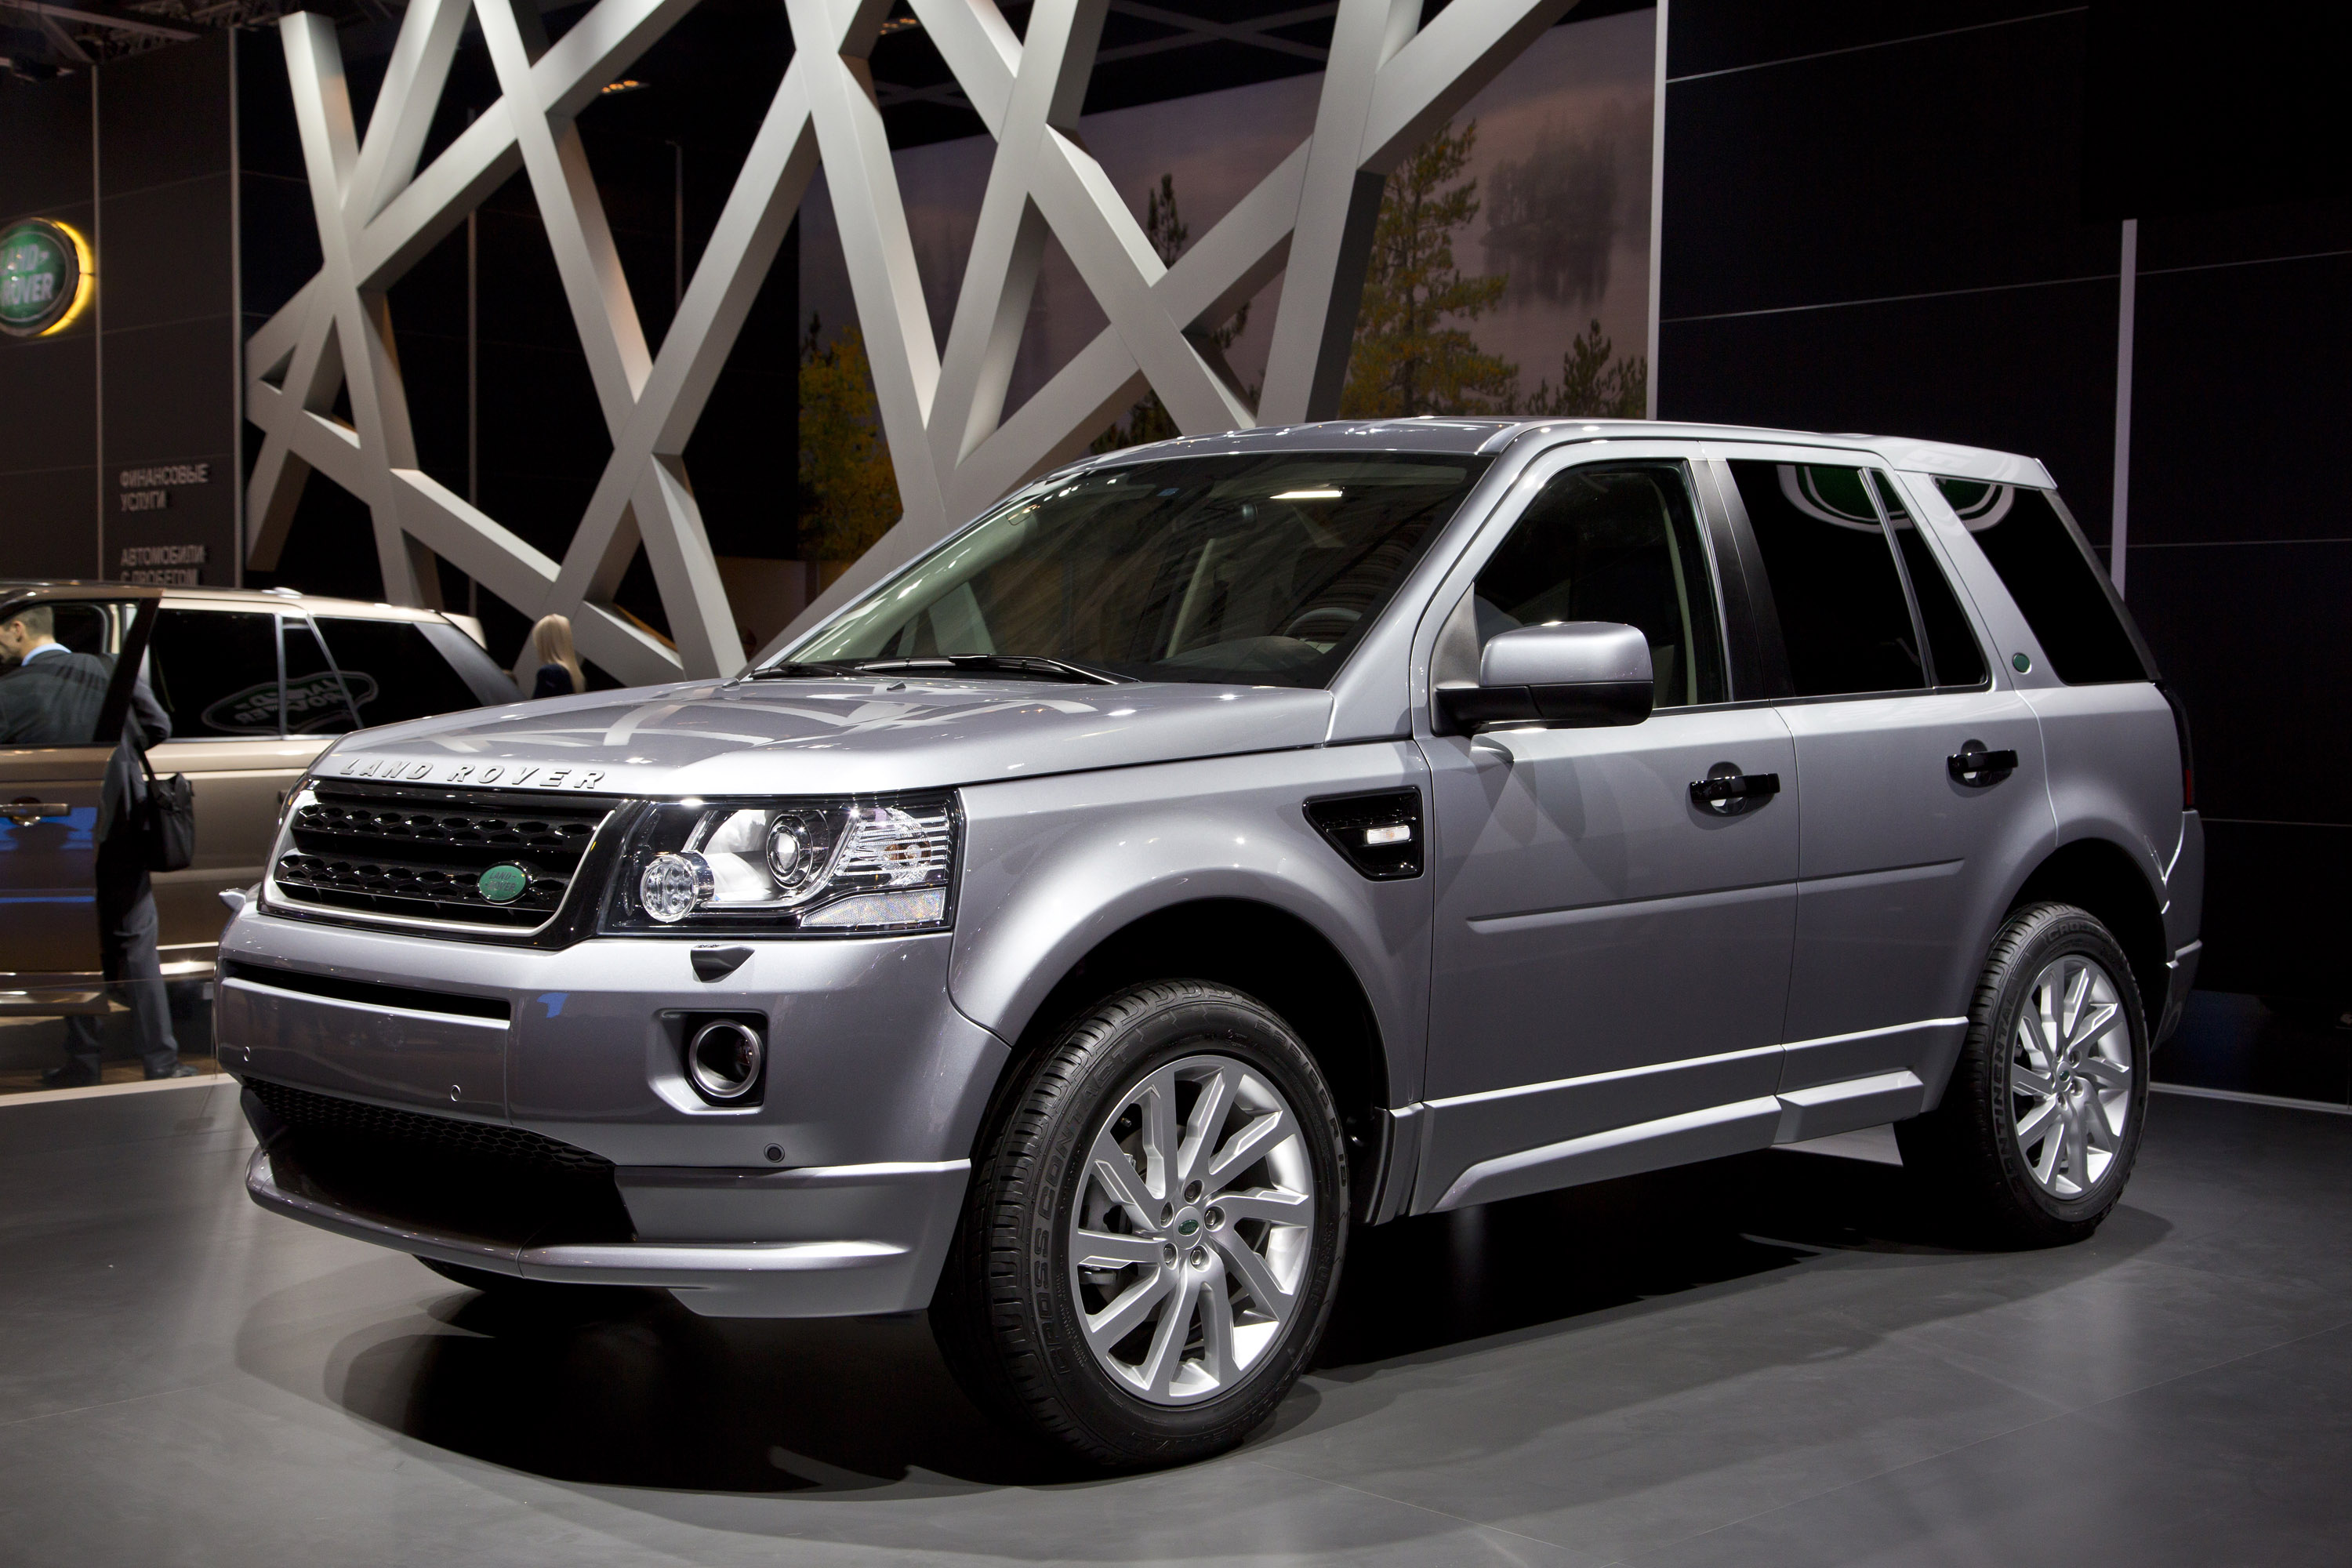 2013 Land Rover Freelander 2 HD Pictures